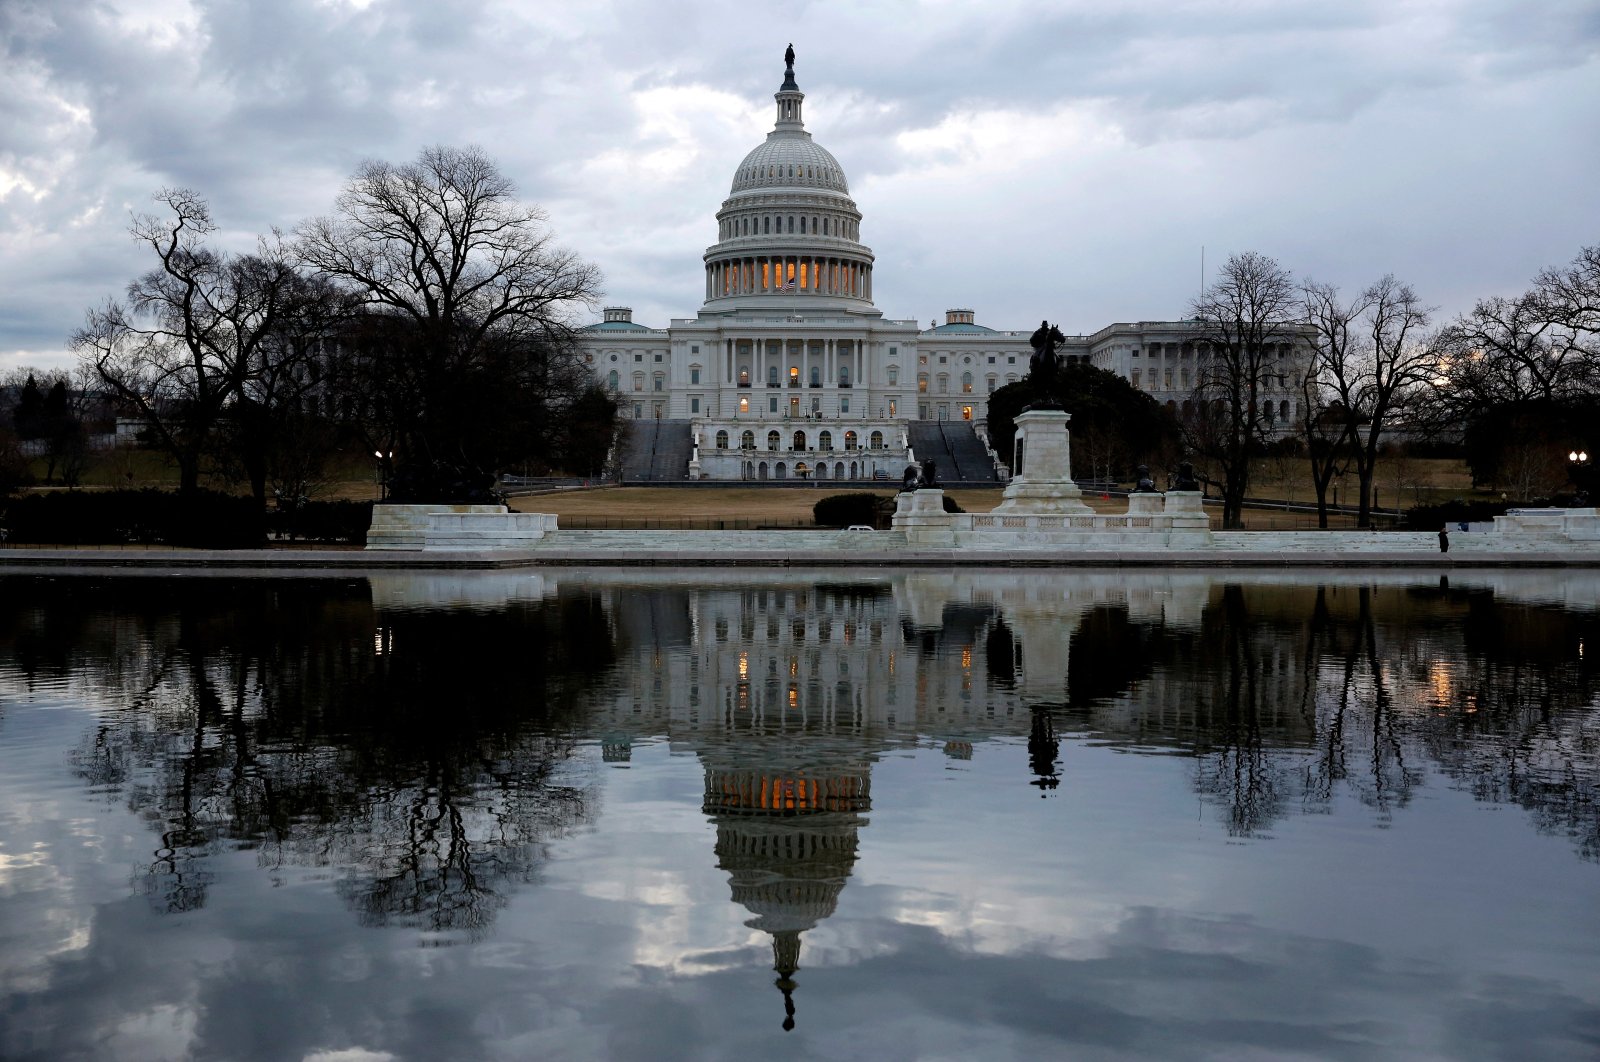 Clouds pass over the U.S. Capitol in Washington, U.S., Jan. 22, 2018. (Reuters Photo)